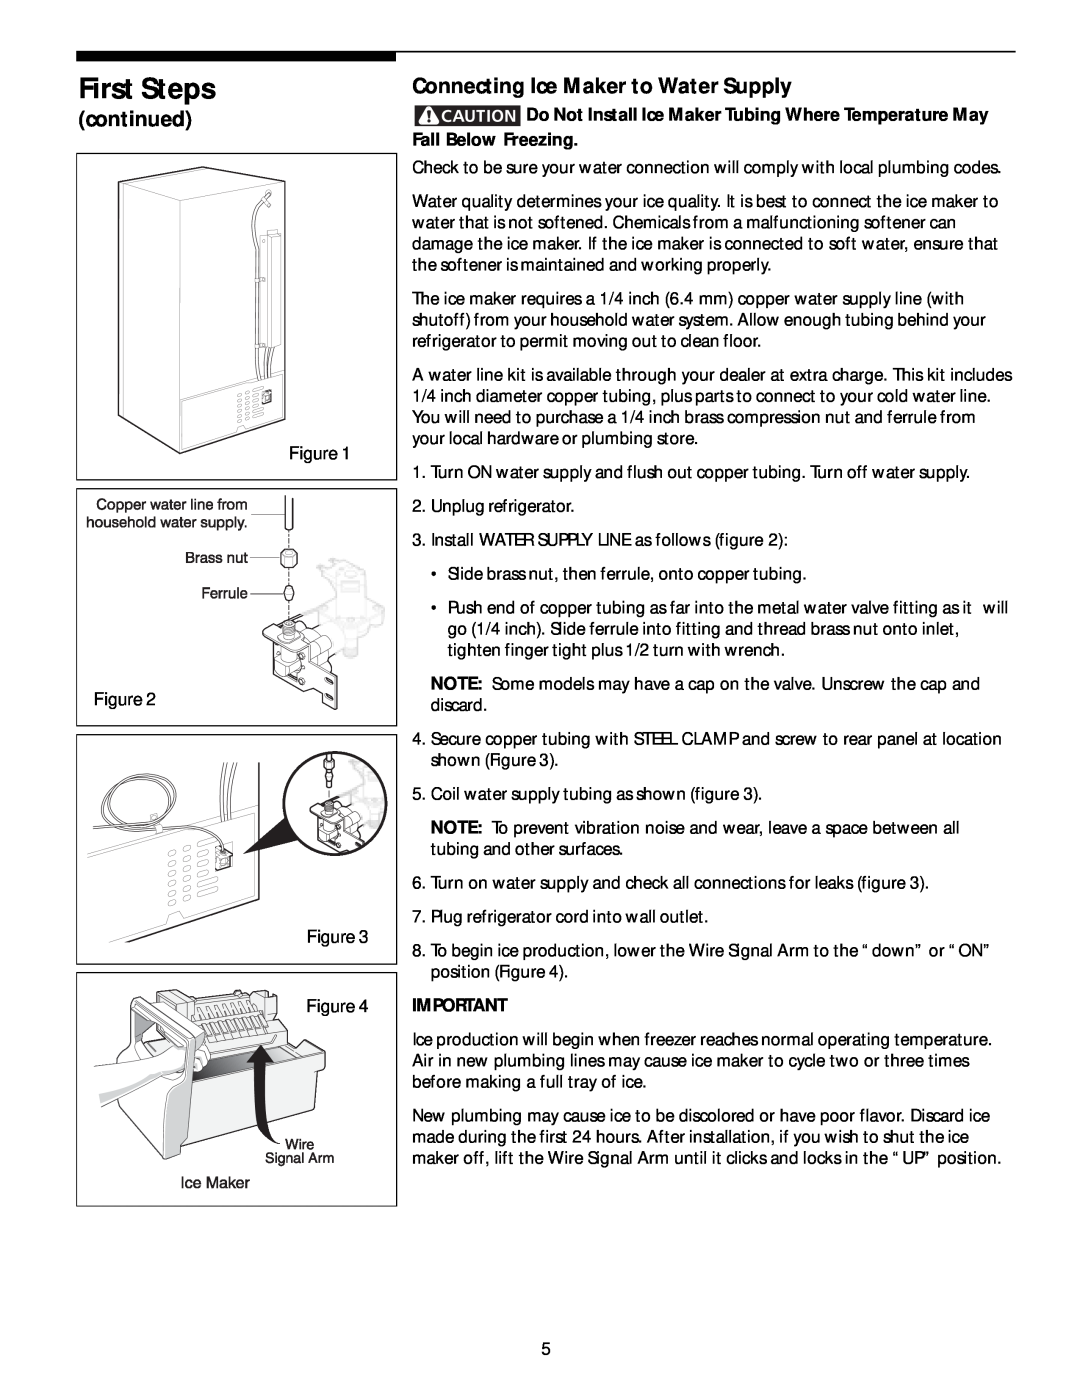 Frigidaire 218954901 manual continued, Connecting Ice Maker to Water Supply, First Steps 